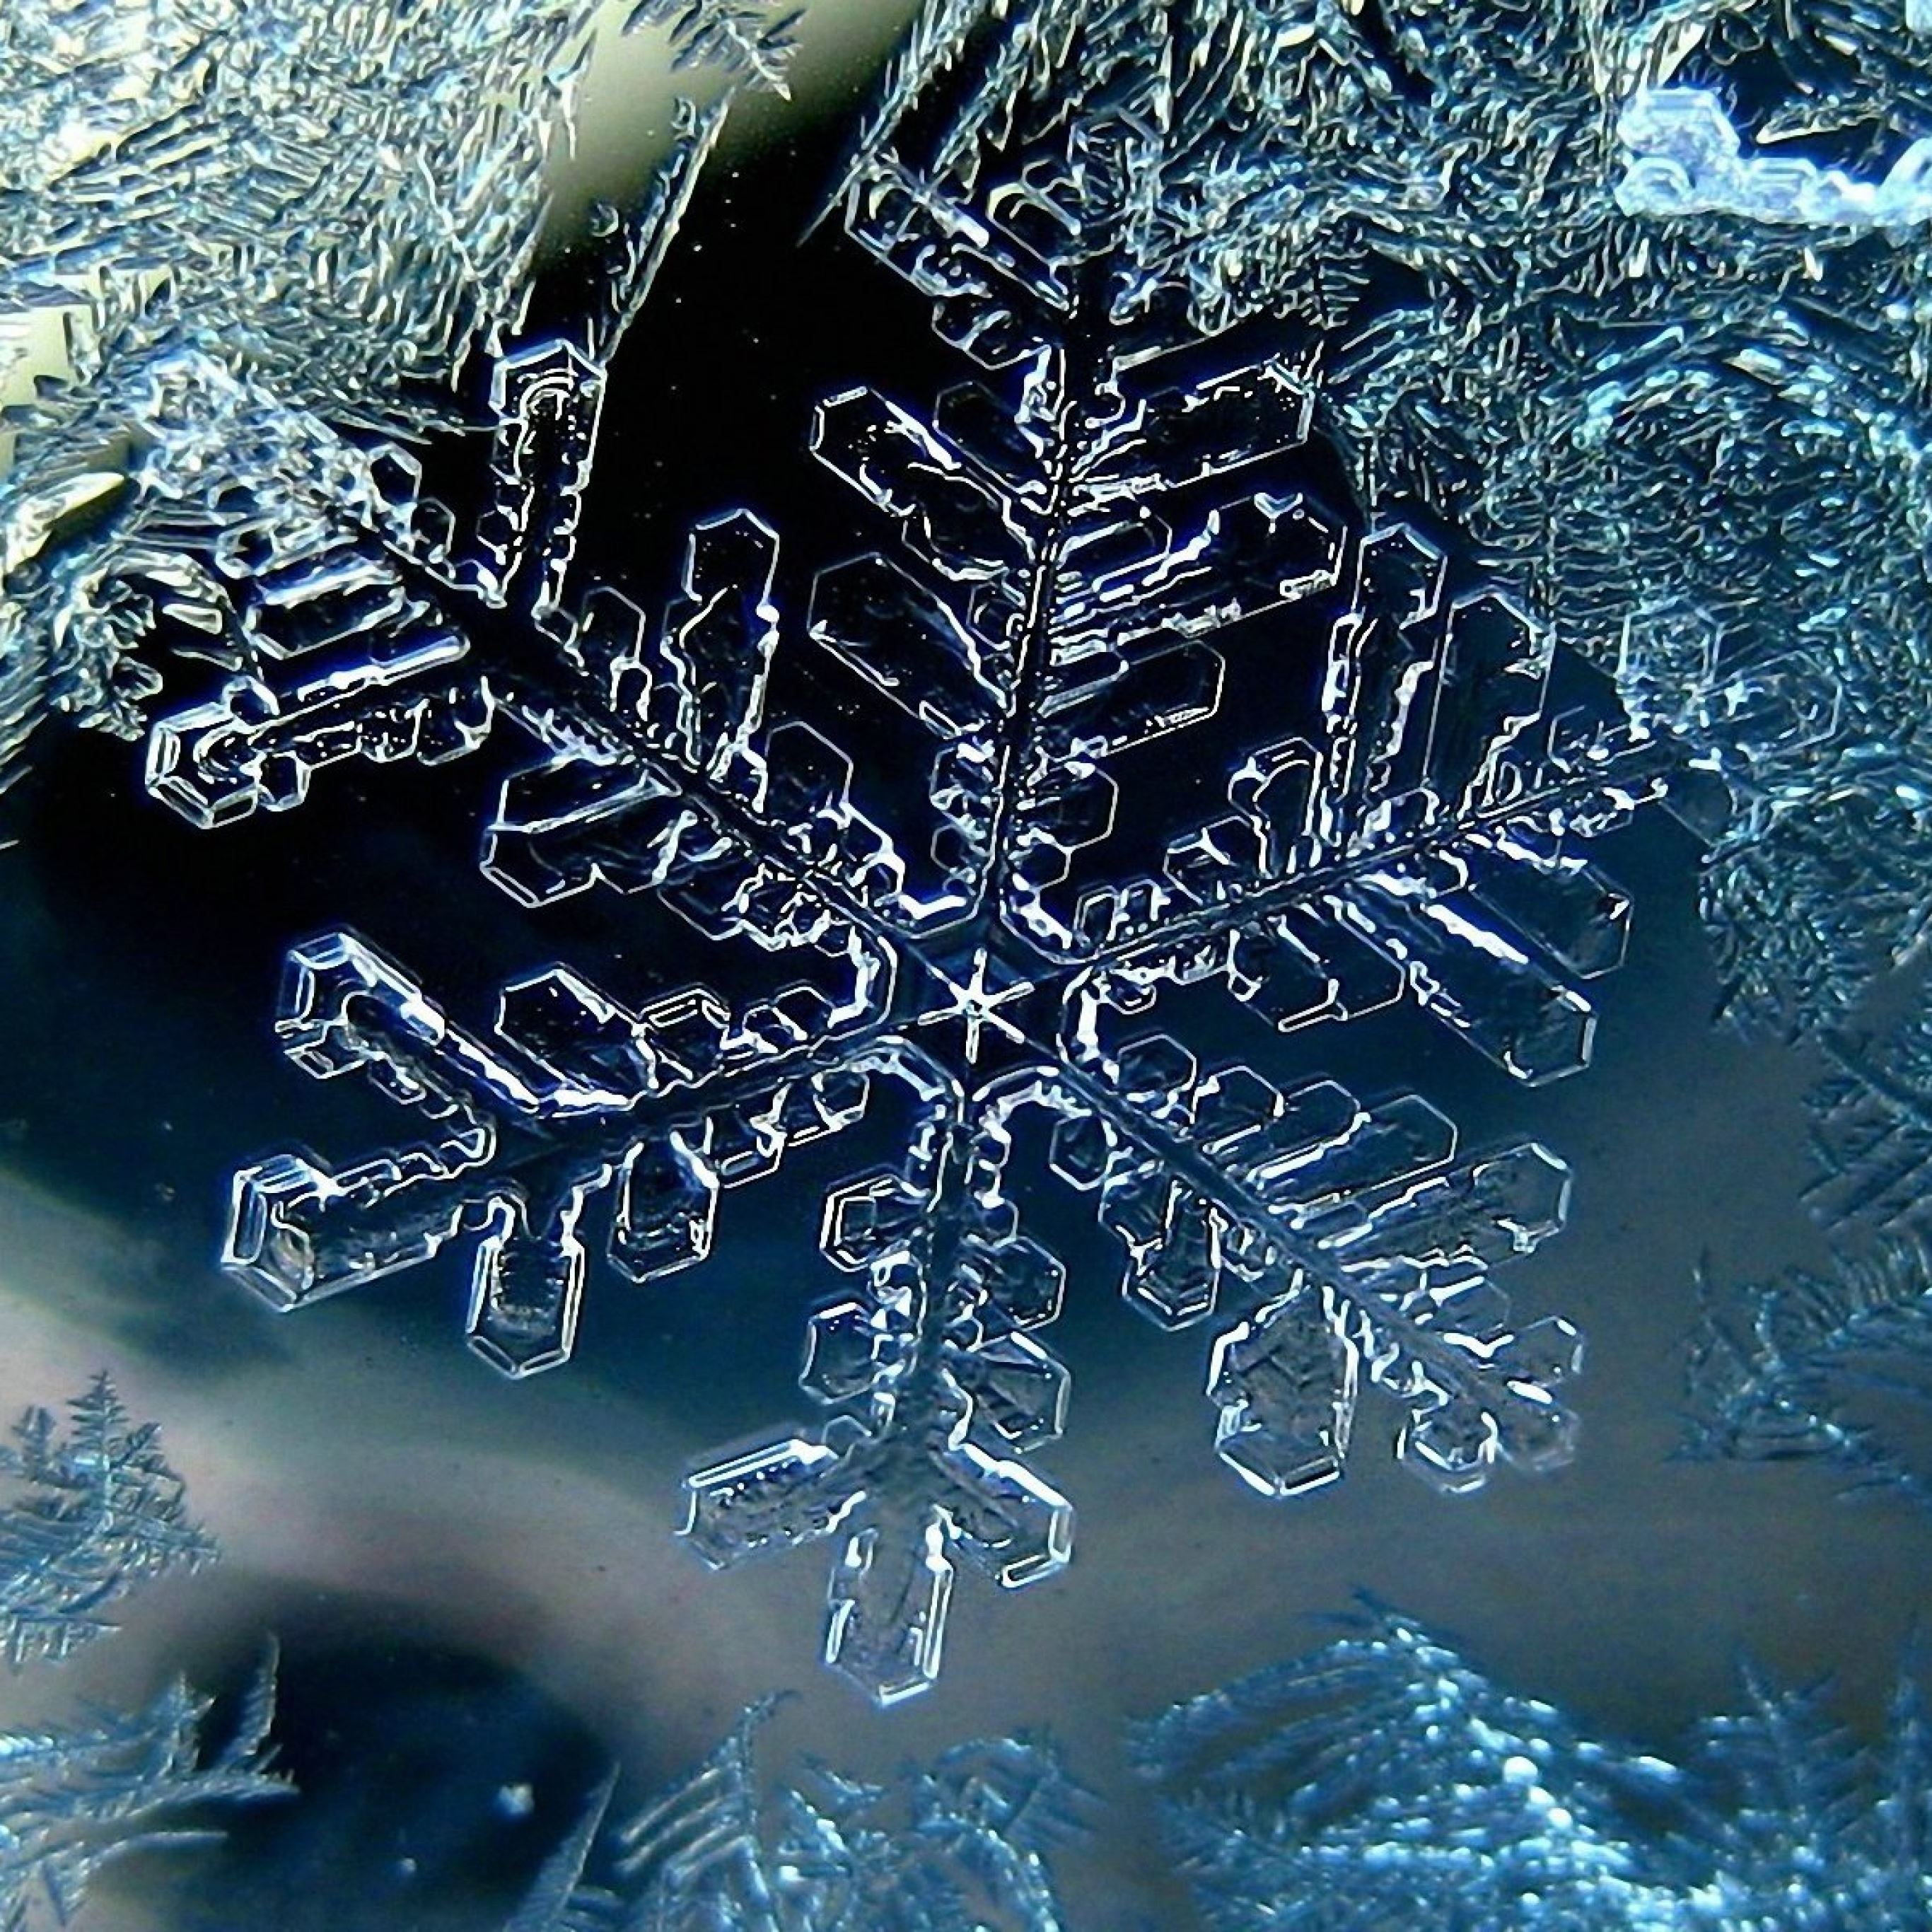 A snowflake is seen under a microscope. - Snowflake